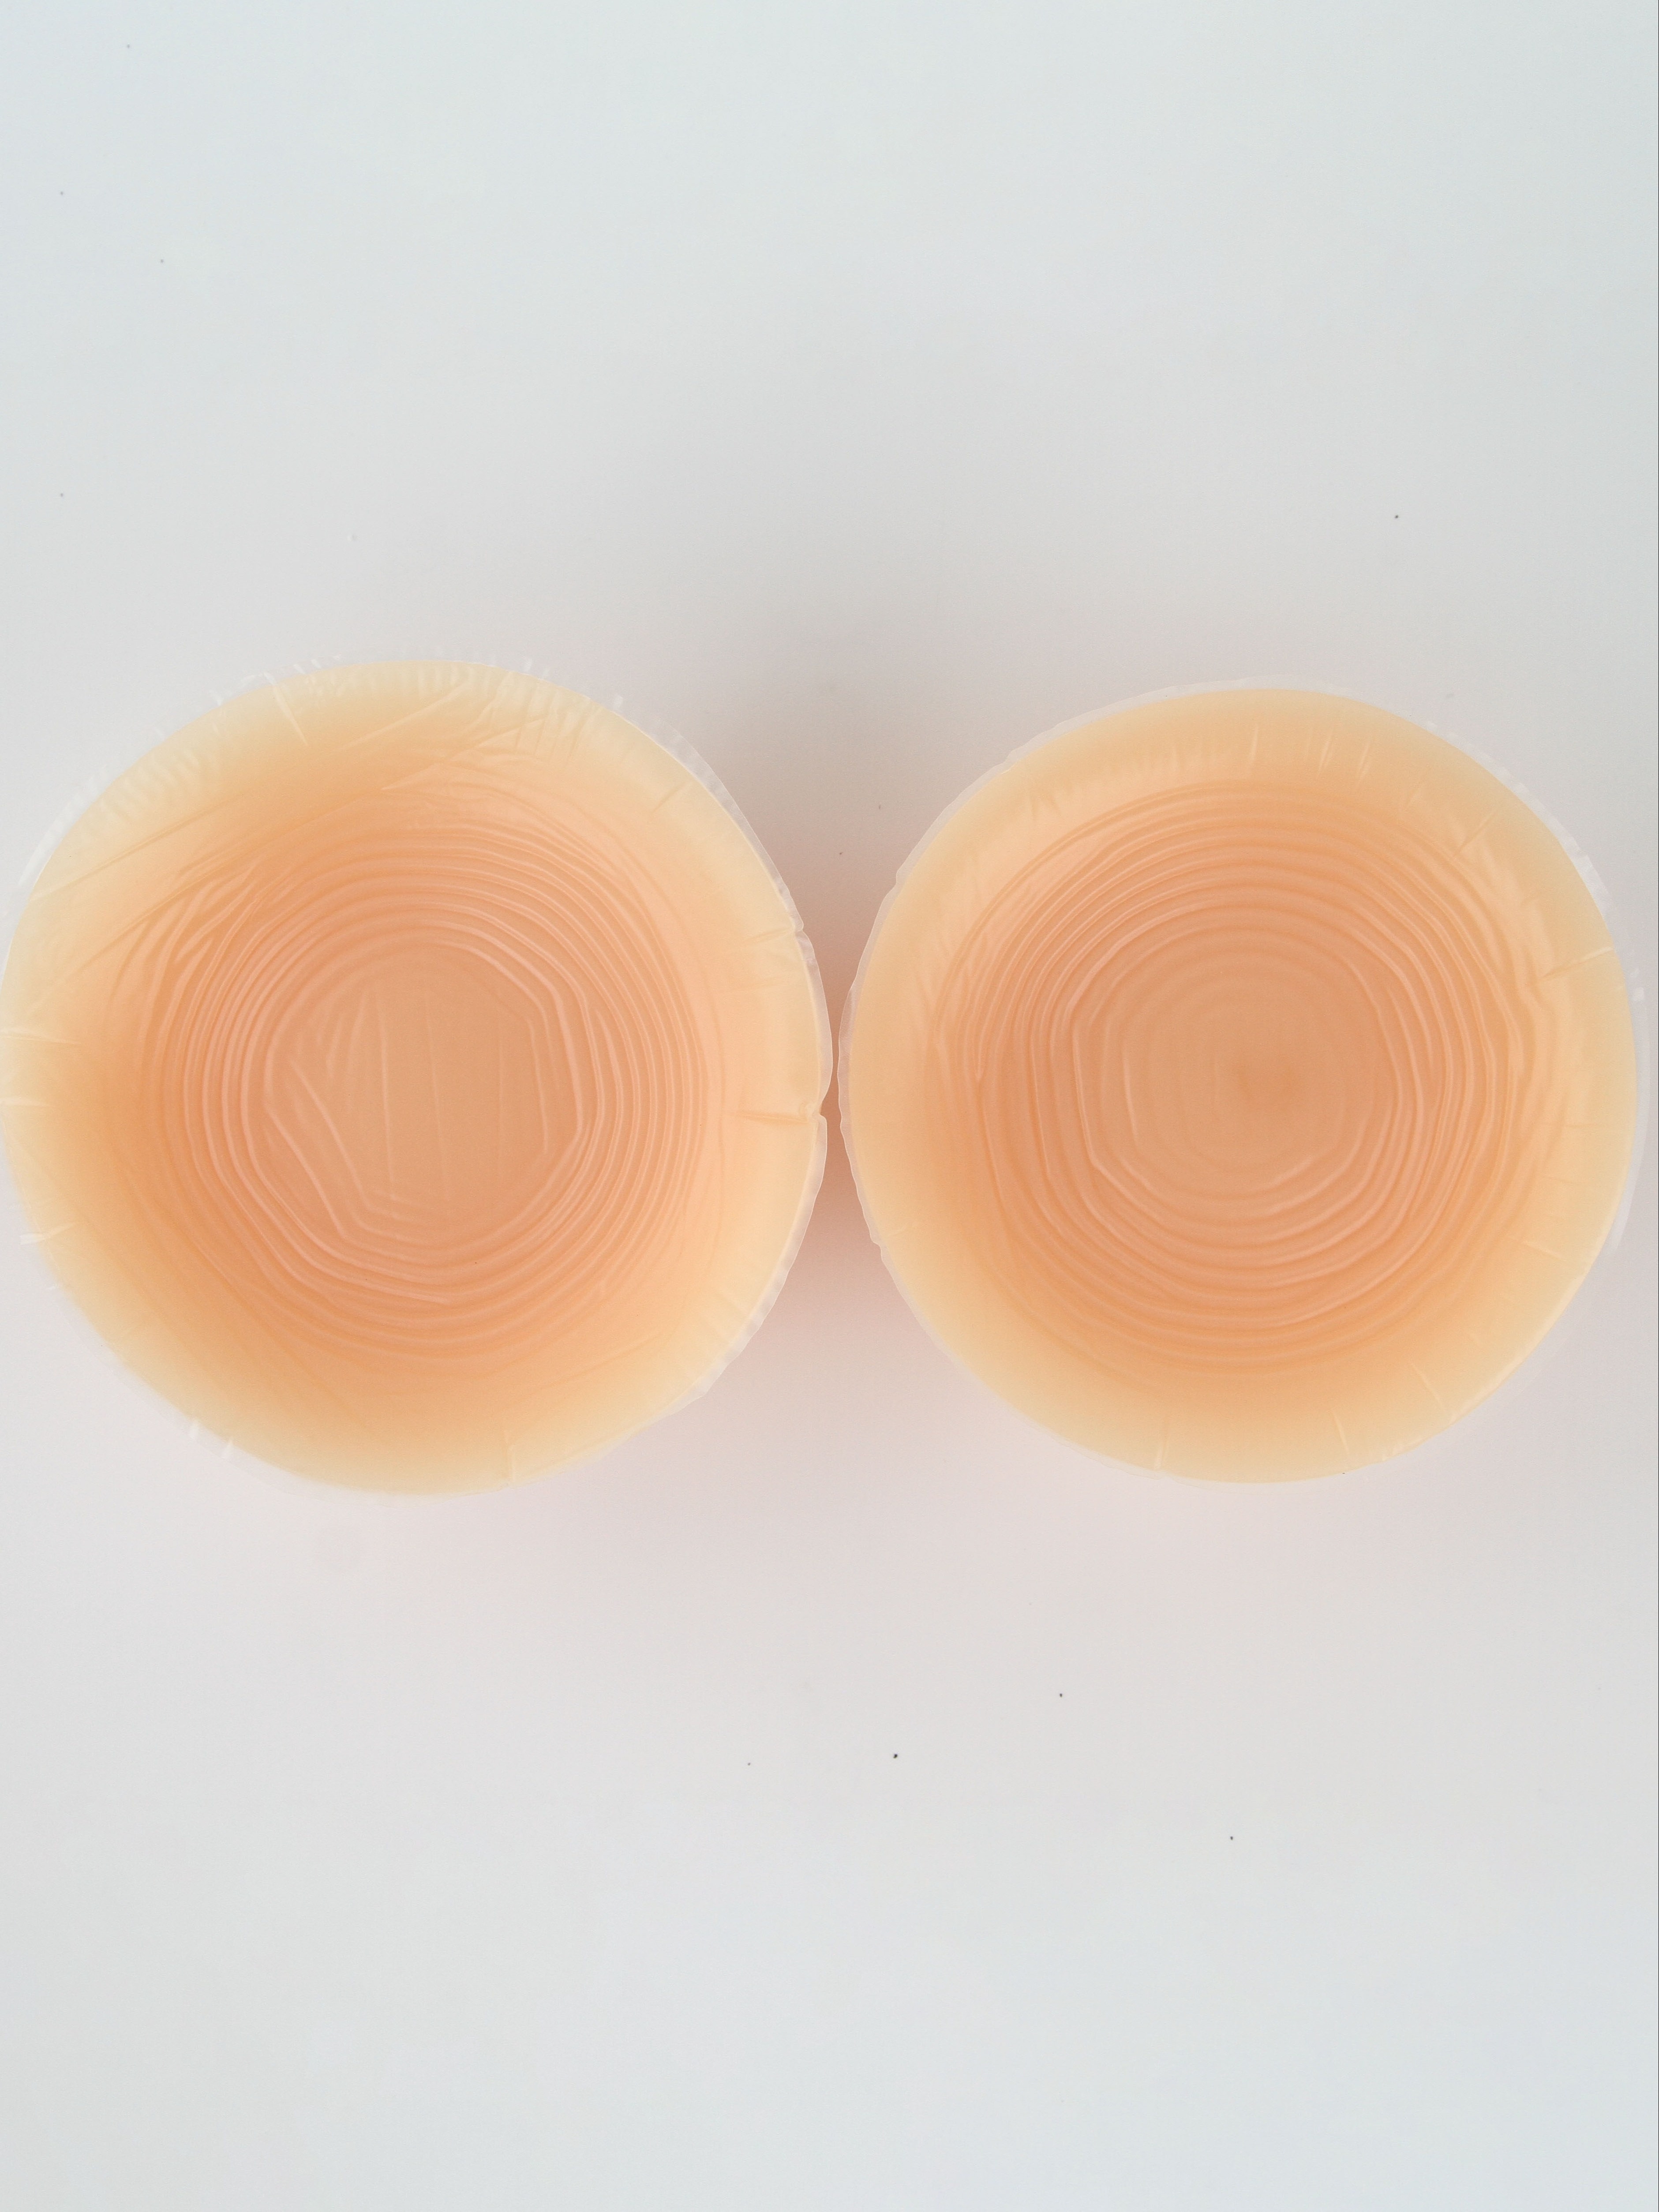 Self Adhesive Silicone Breast Forms 1 Pair for Mastectomy Crossdress  Transgender